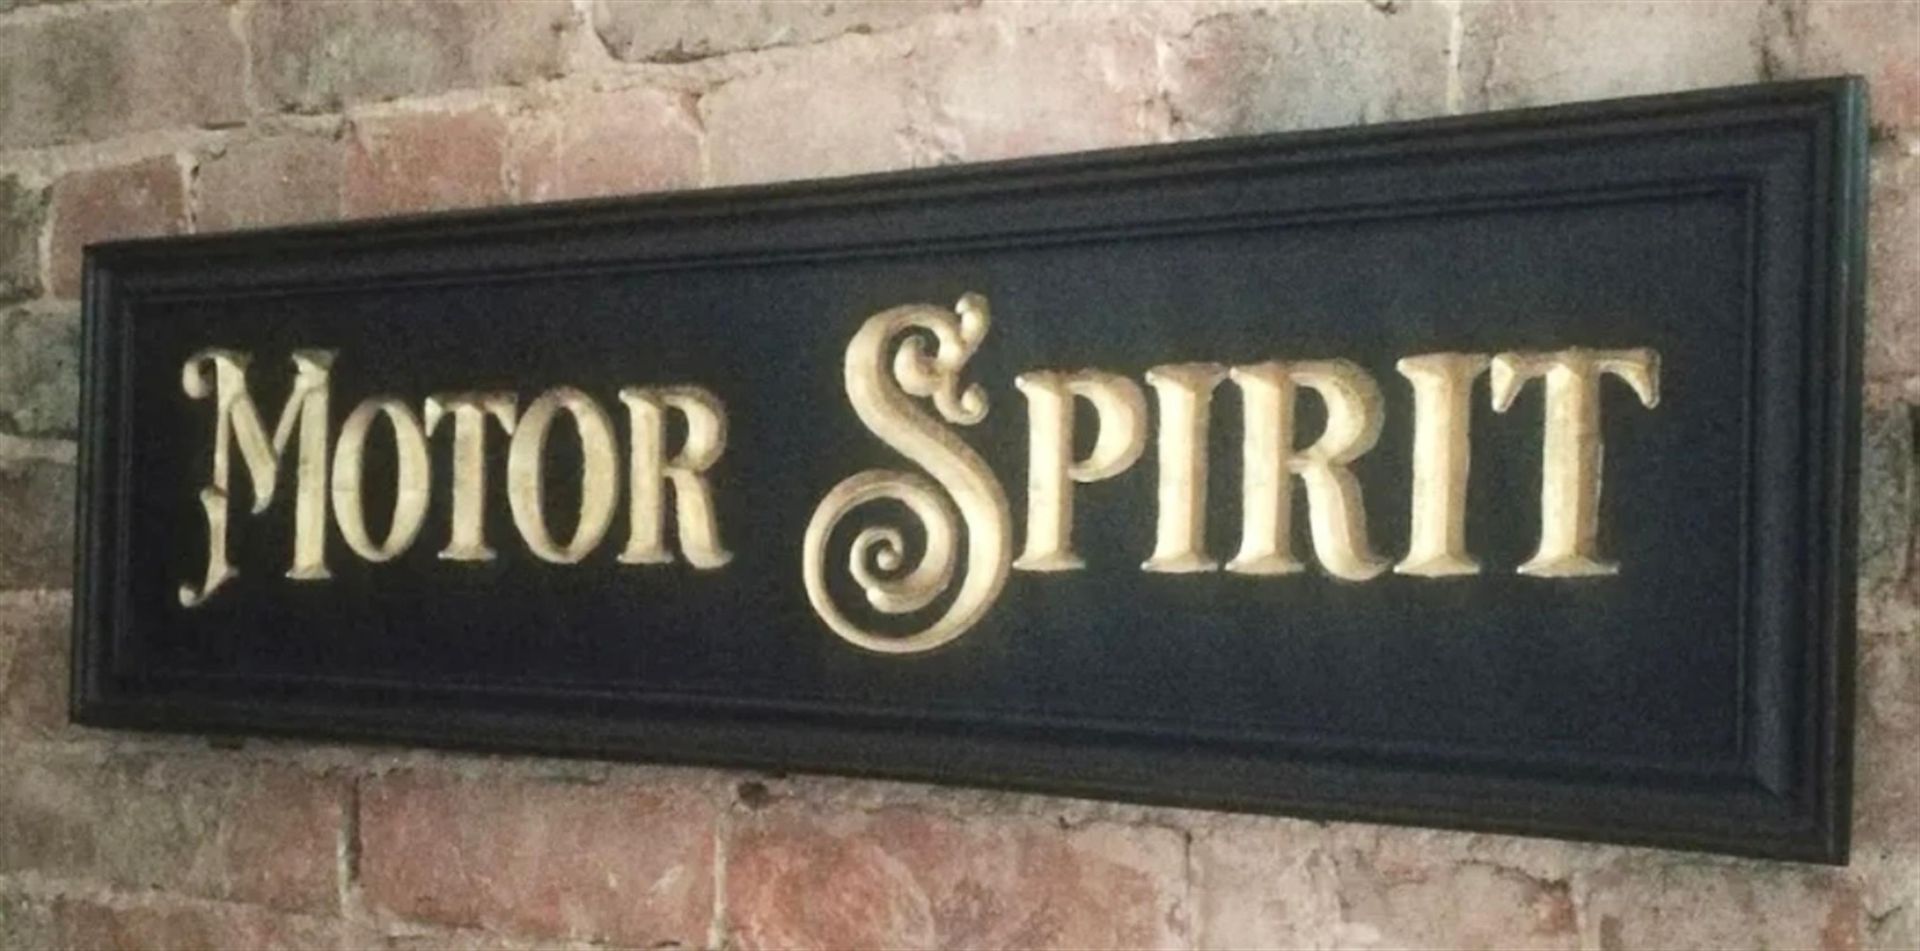 A Beautiful Hand-Carved Wooden 'Motor Spirit' Wall Sign - Image 2 of 7